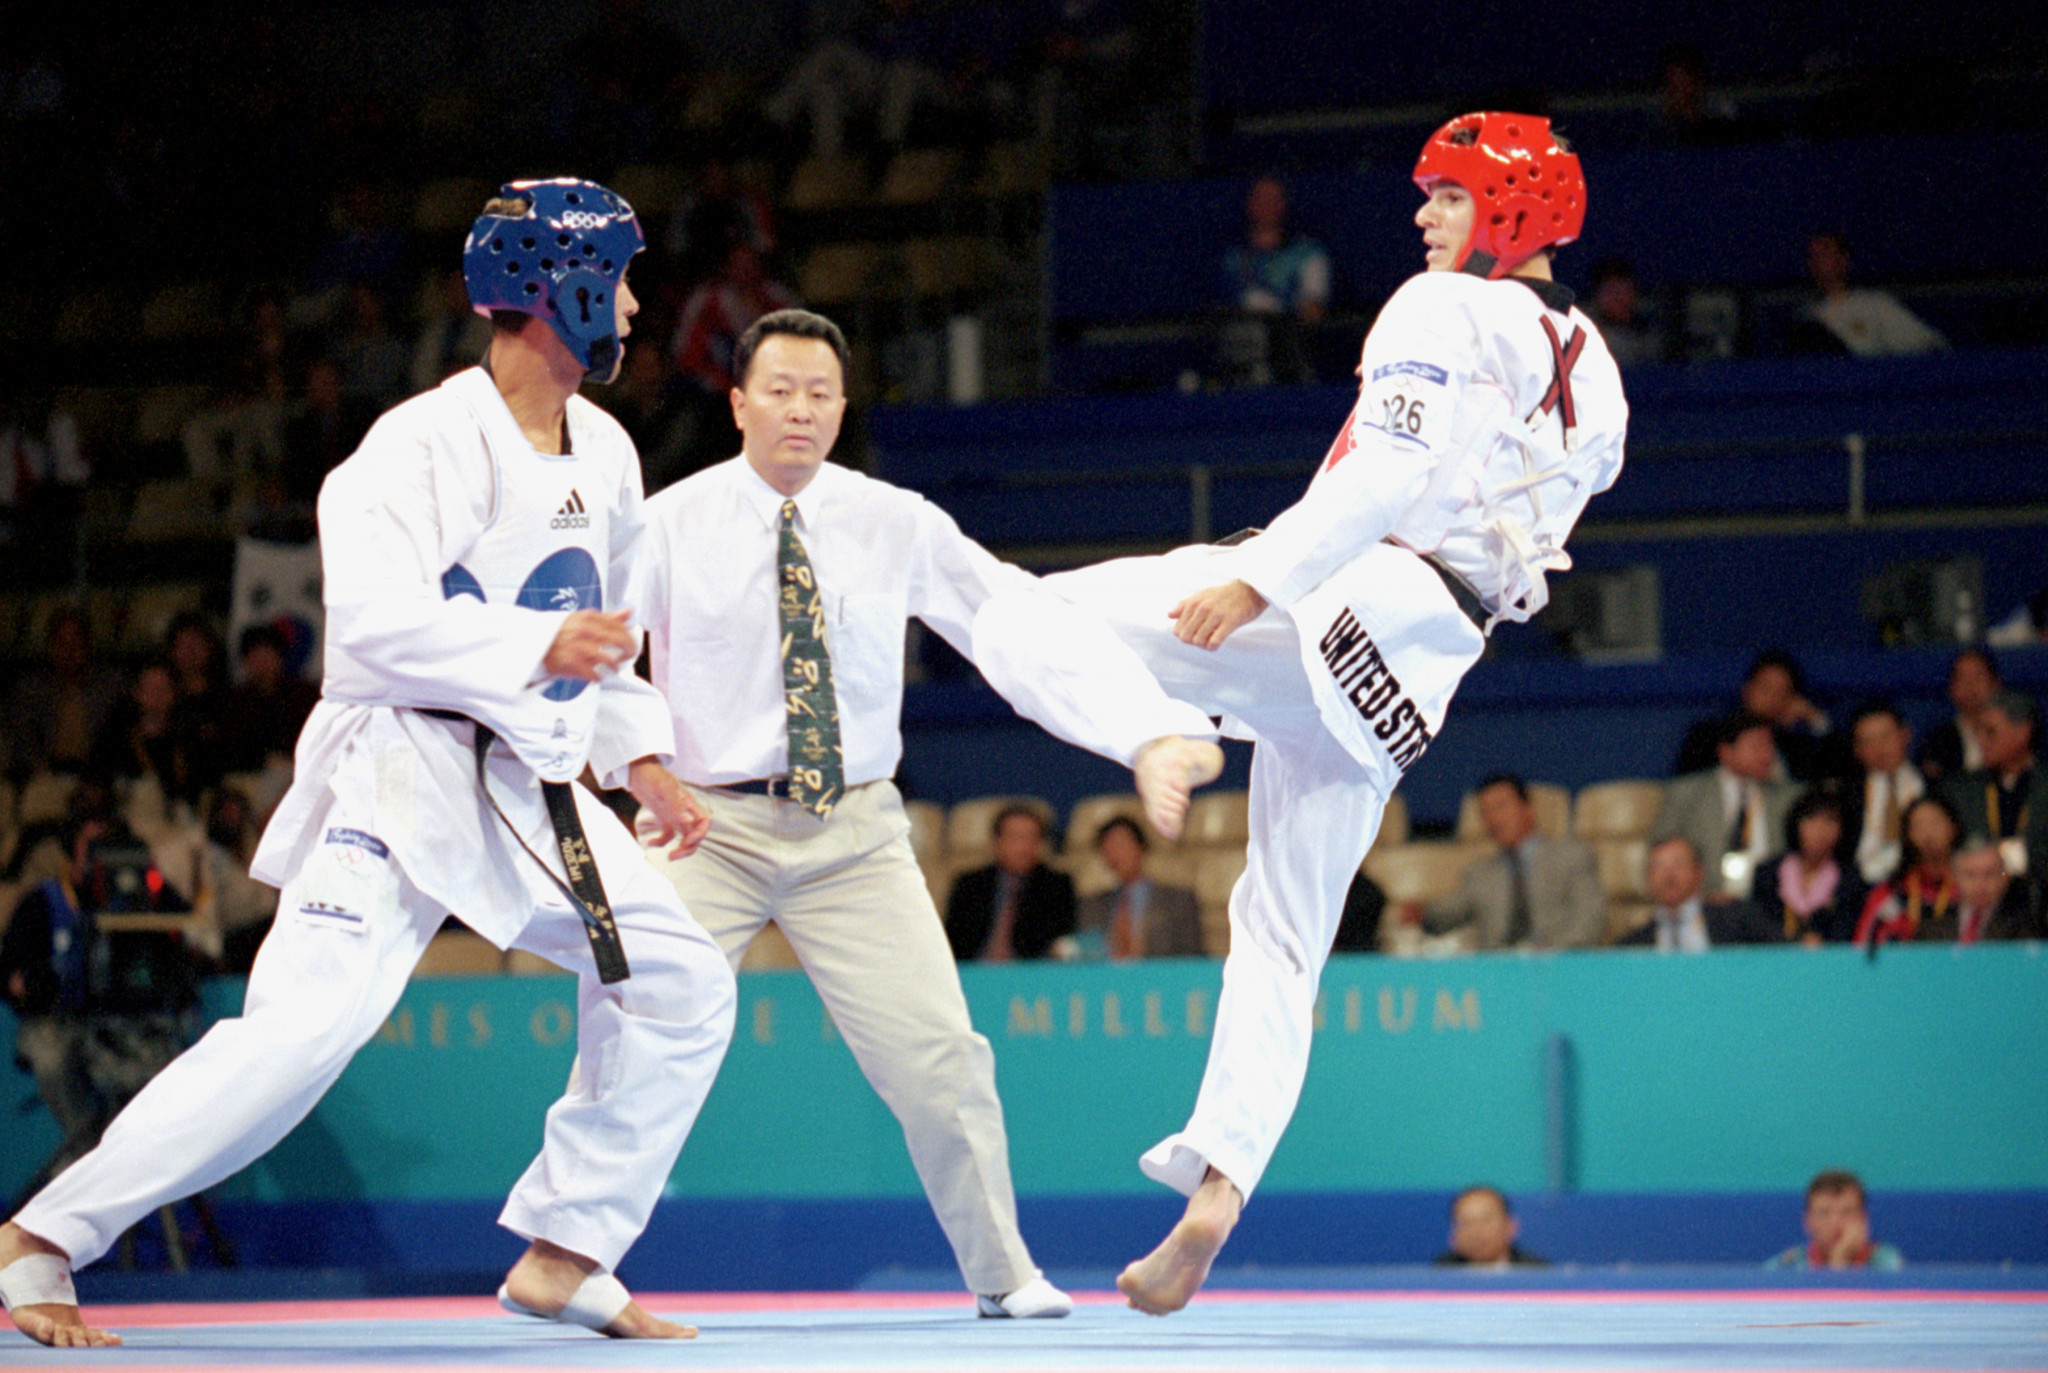 World Taekwondo asks for evidence after claim bribes used to help gain Olympic place